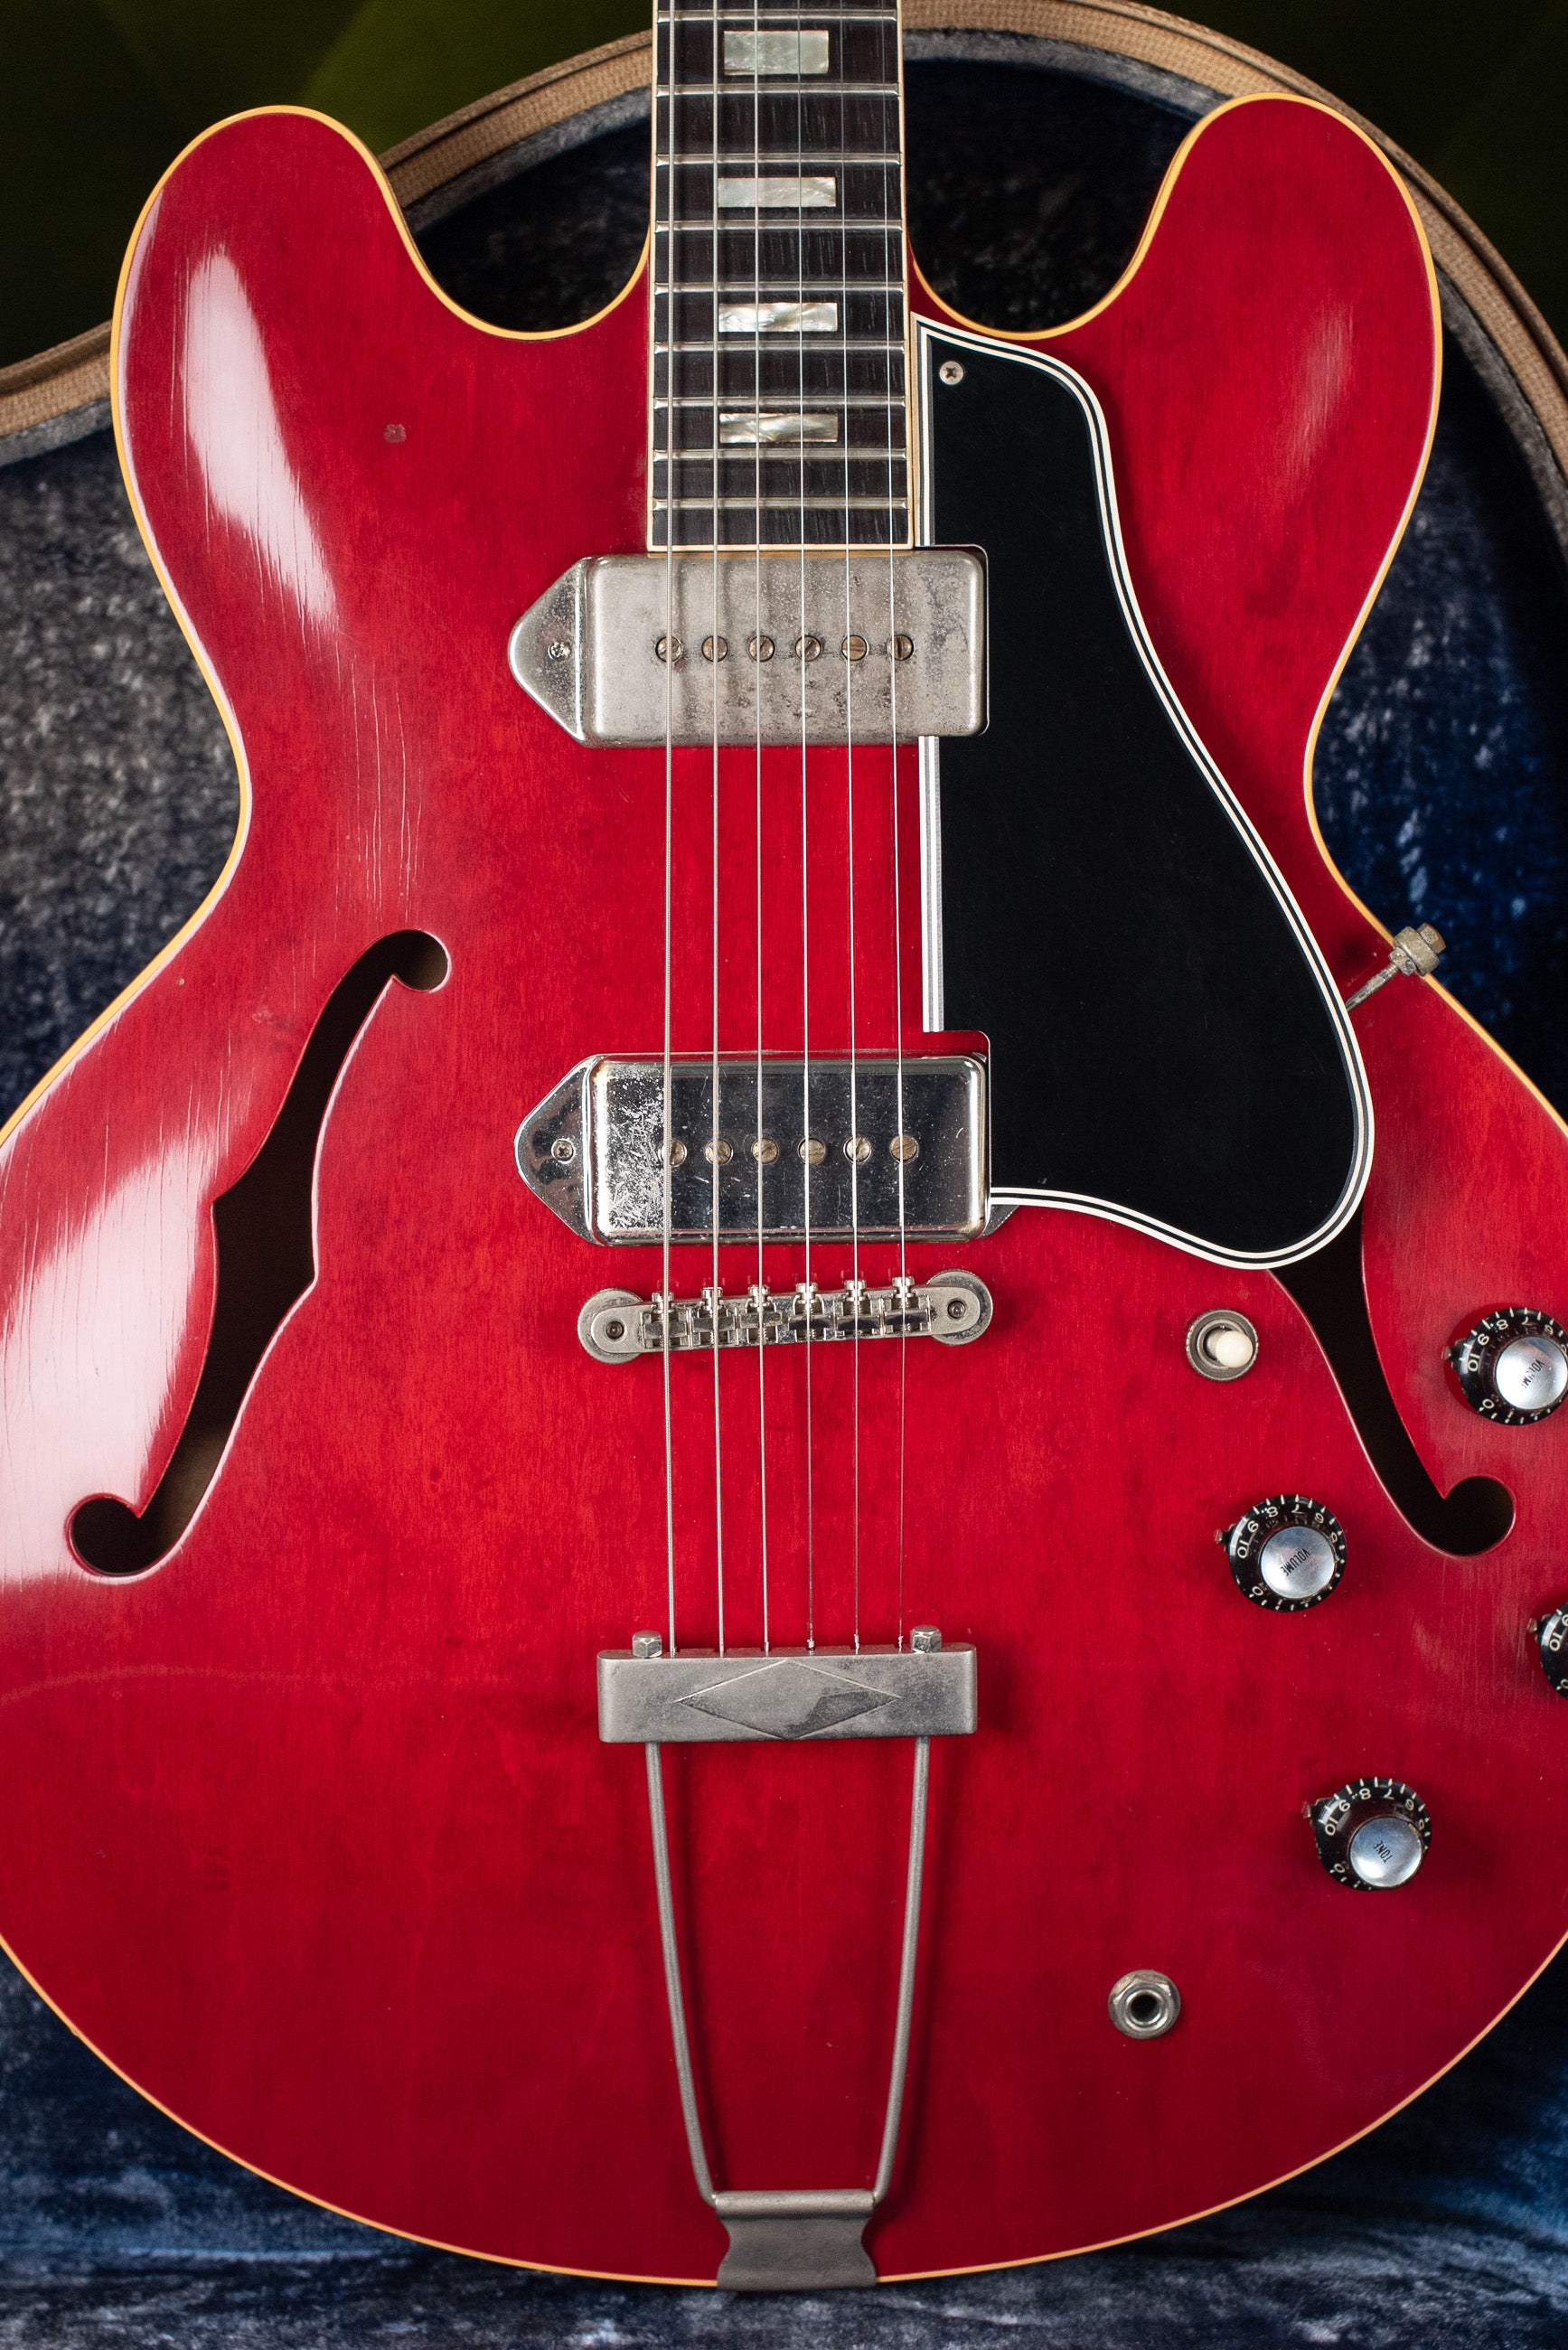 Vintage 1962 Gibson ES-330 TDC Cherry Red electric guitar